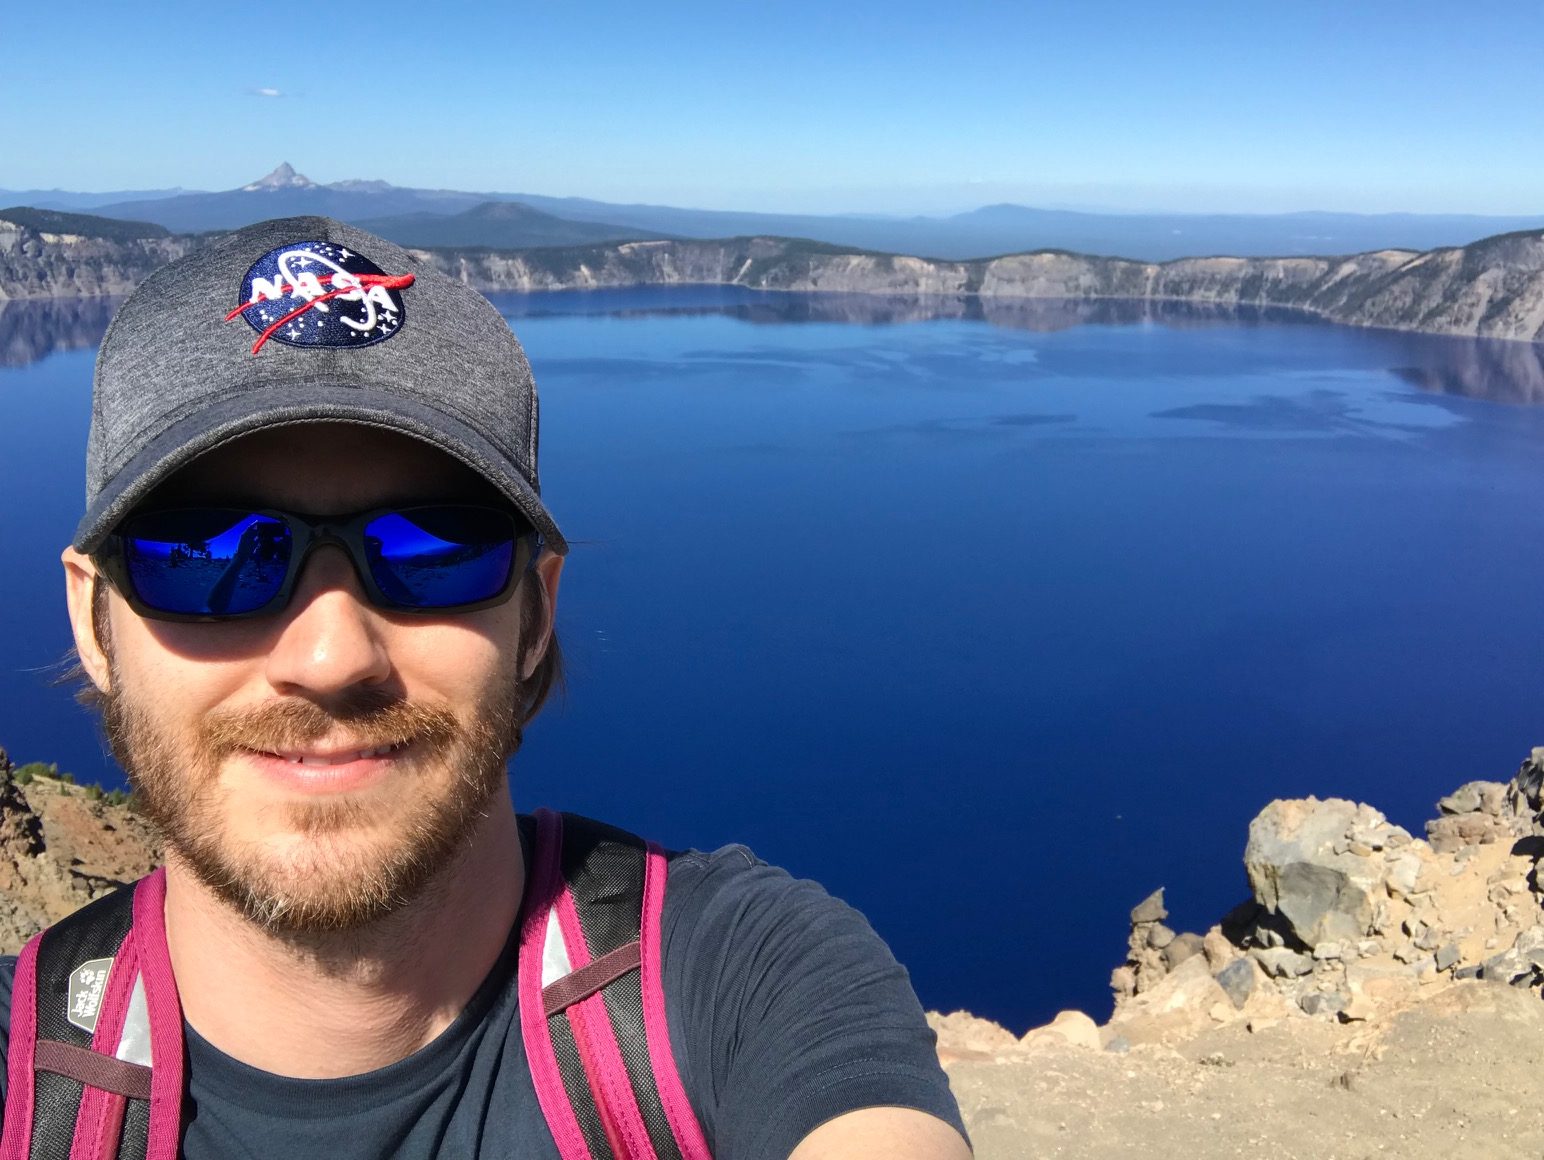 Joshua Schlieder, a man with a short brown beard, smiles and holds the camera up in a selfie outdoors near Crater Lake, Oregon. Joshua wears blue reflective sunglasses, a gray baseball cap with the NASA logo, and a navy T-shirt, and carries a backpack with pink straps. He takes up part of the left side of the image, with the still, deep blue lake visible in the background. Tan rocks and dirt are visible in the foreground, and the lake's rocky opposite shore is visible in the distance, with blue mountains on the horizon. It is a bright sunny day and the sky is cloudless and blue.